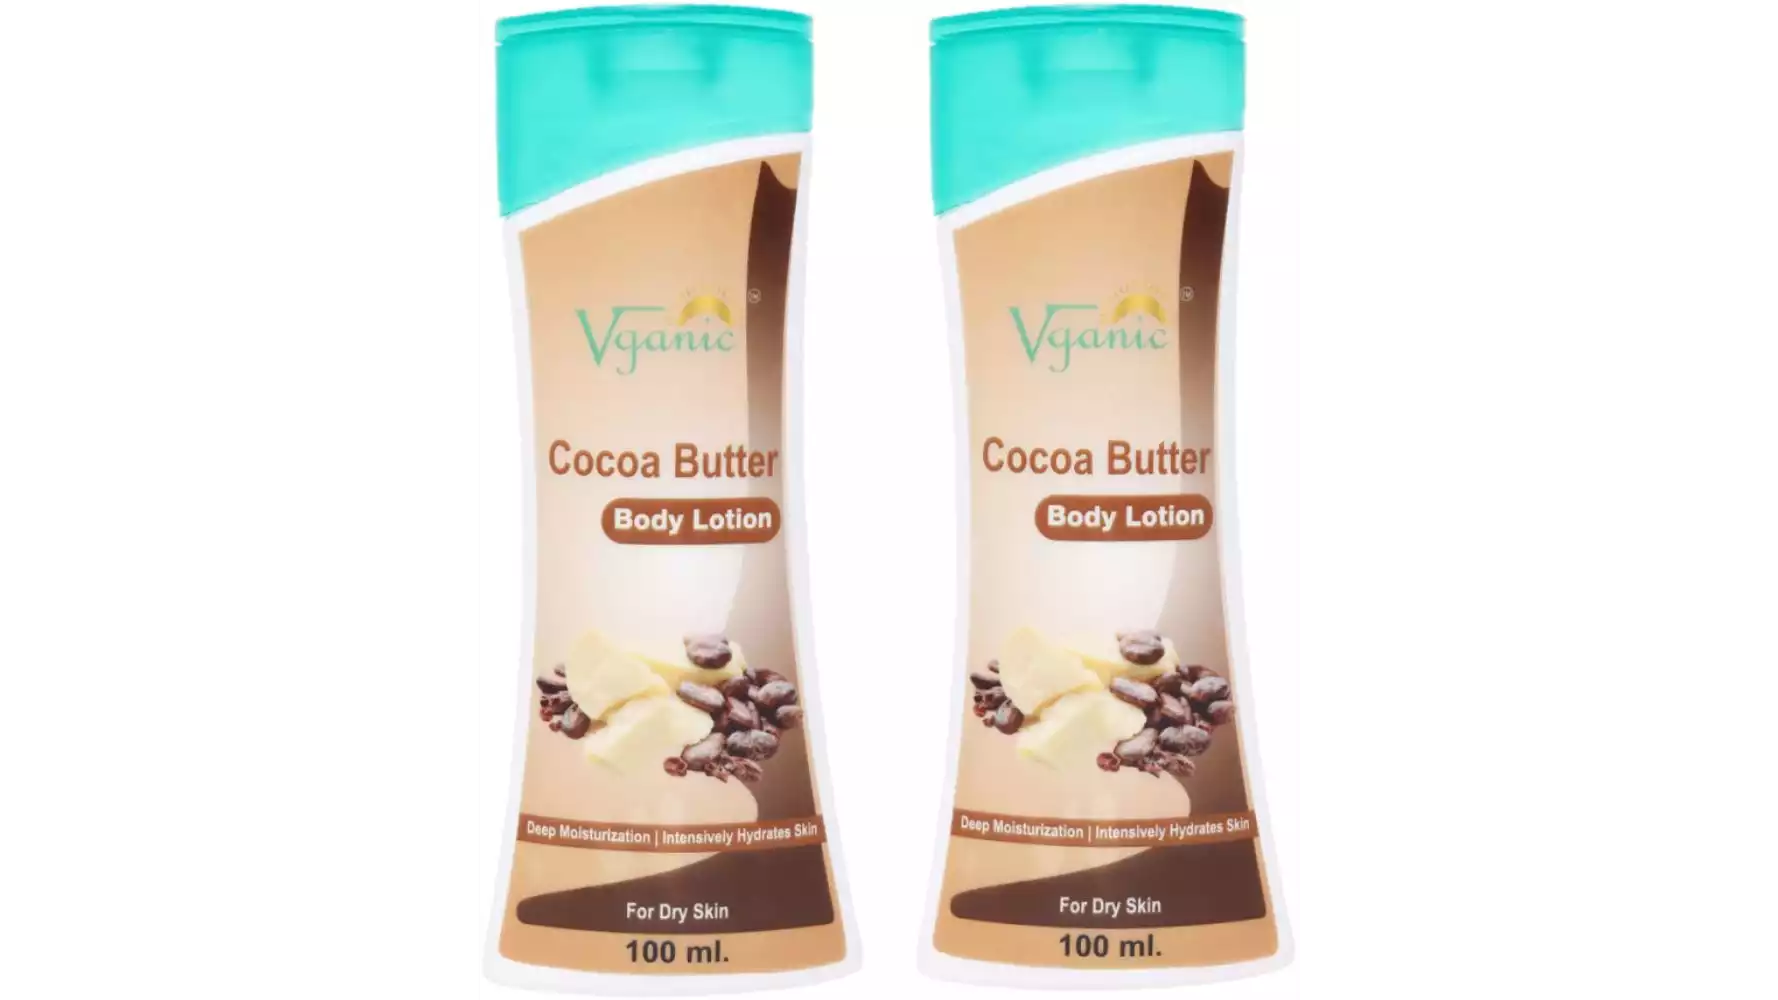 Vganic Cocoa Butter Body Lotion (100ml, Pack of 2)